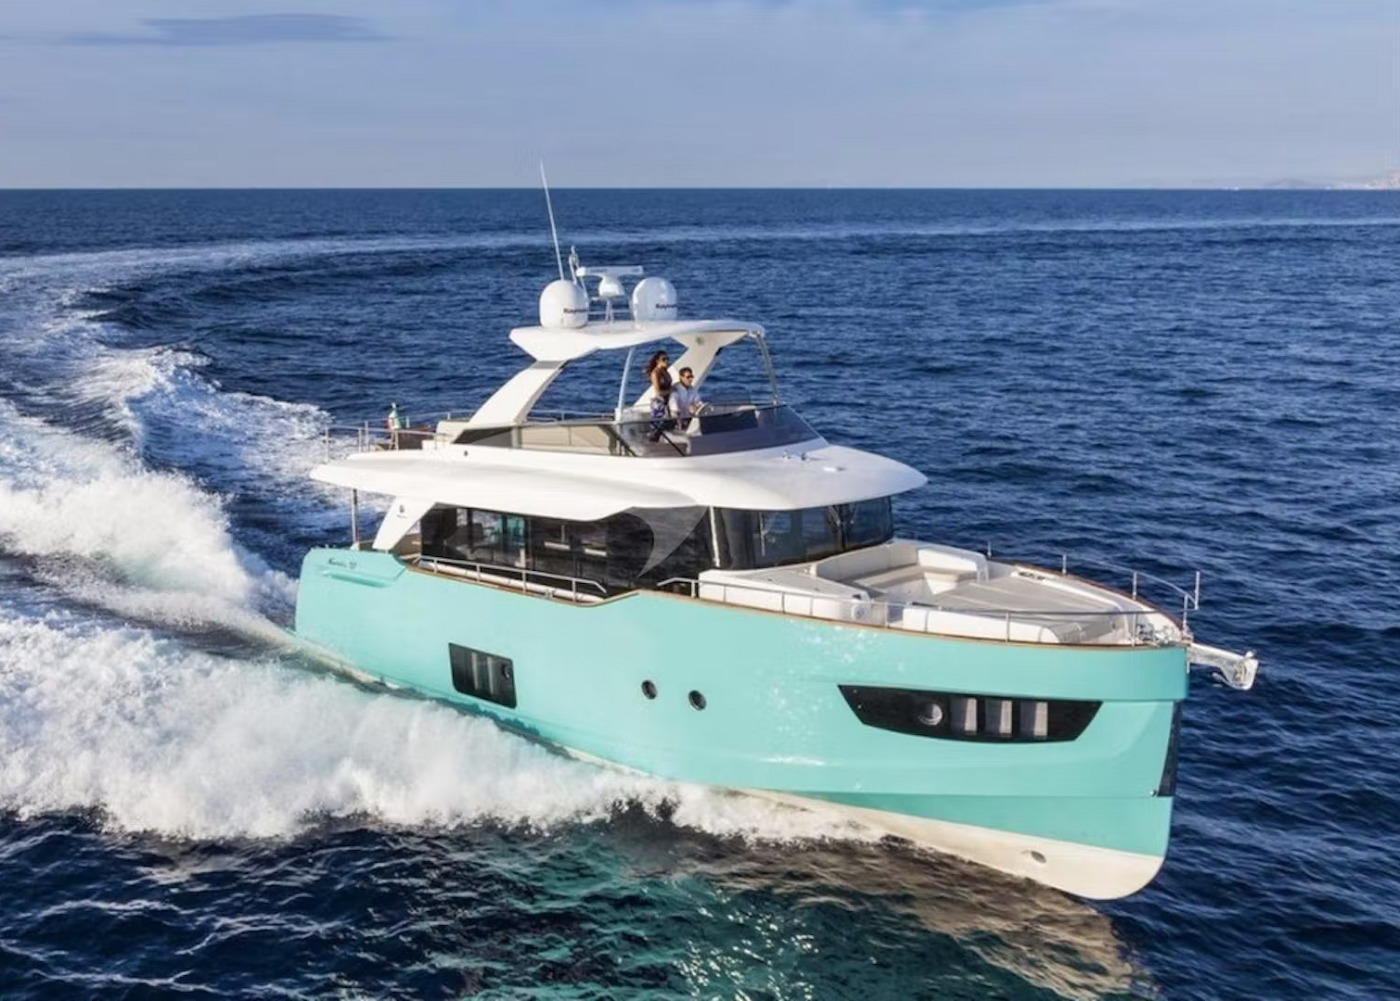 €100k Price Reduction on Absolute Navetta 58 yacht for sale ELMA